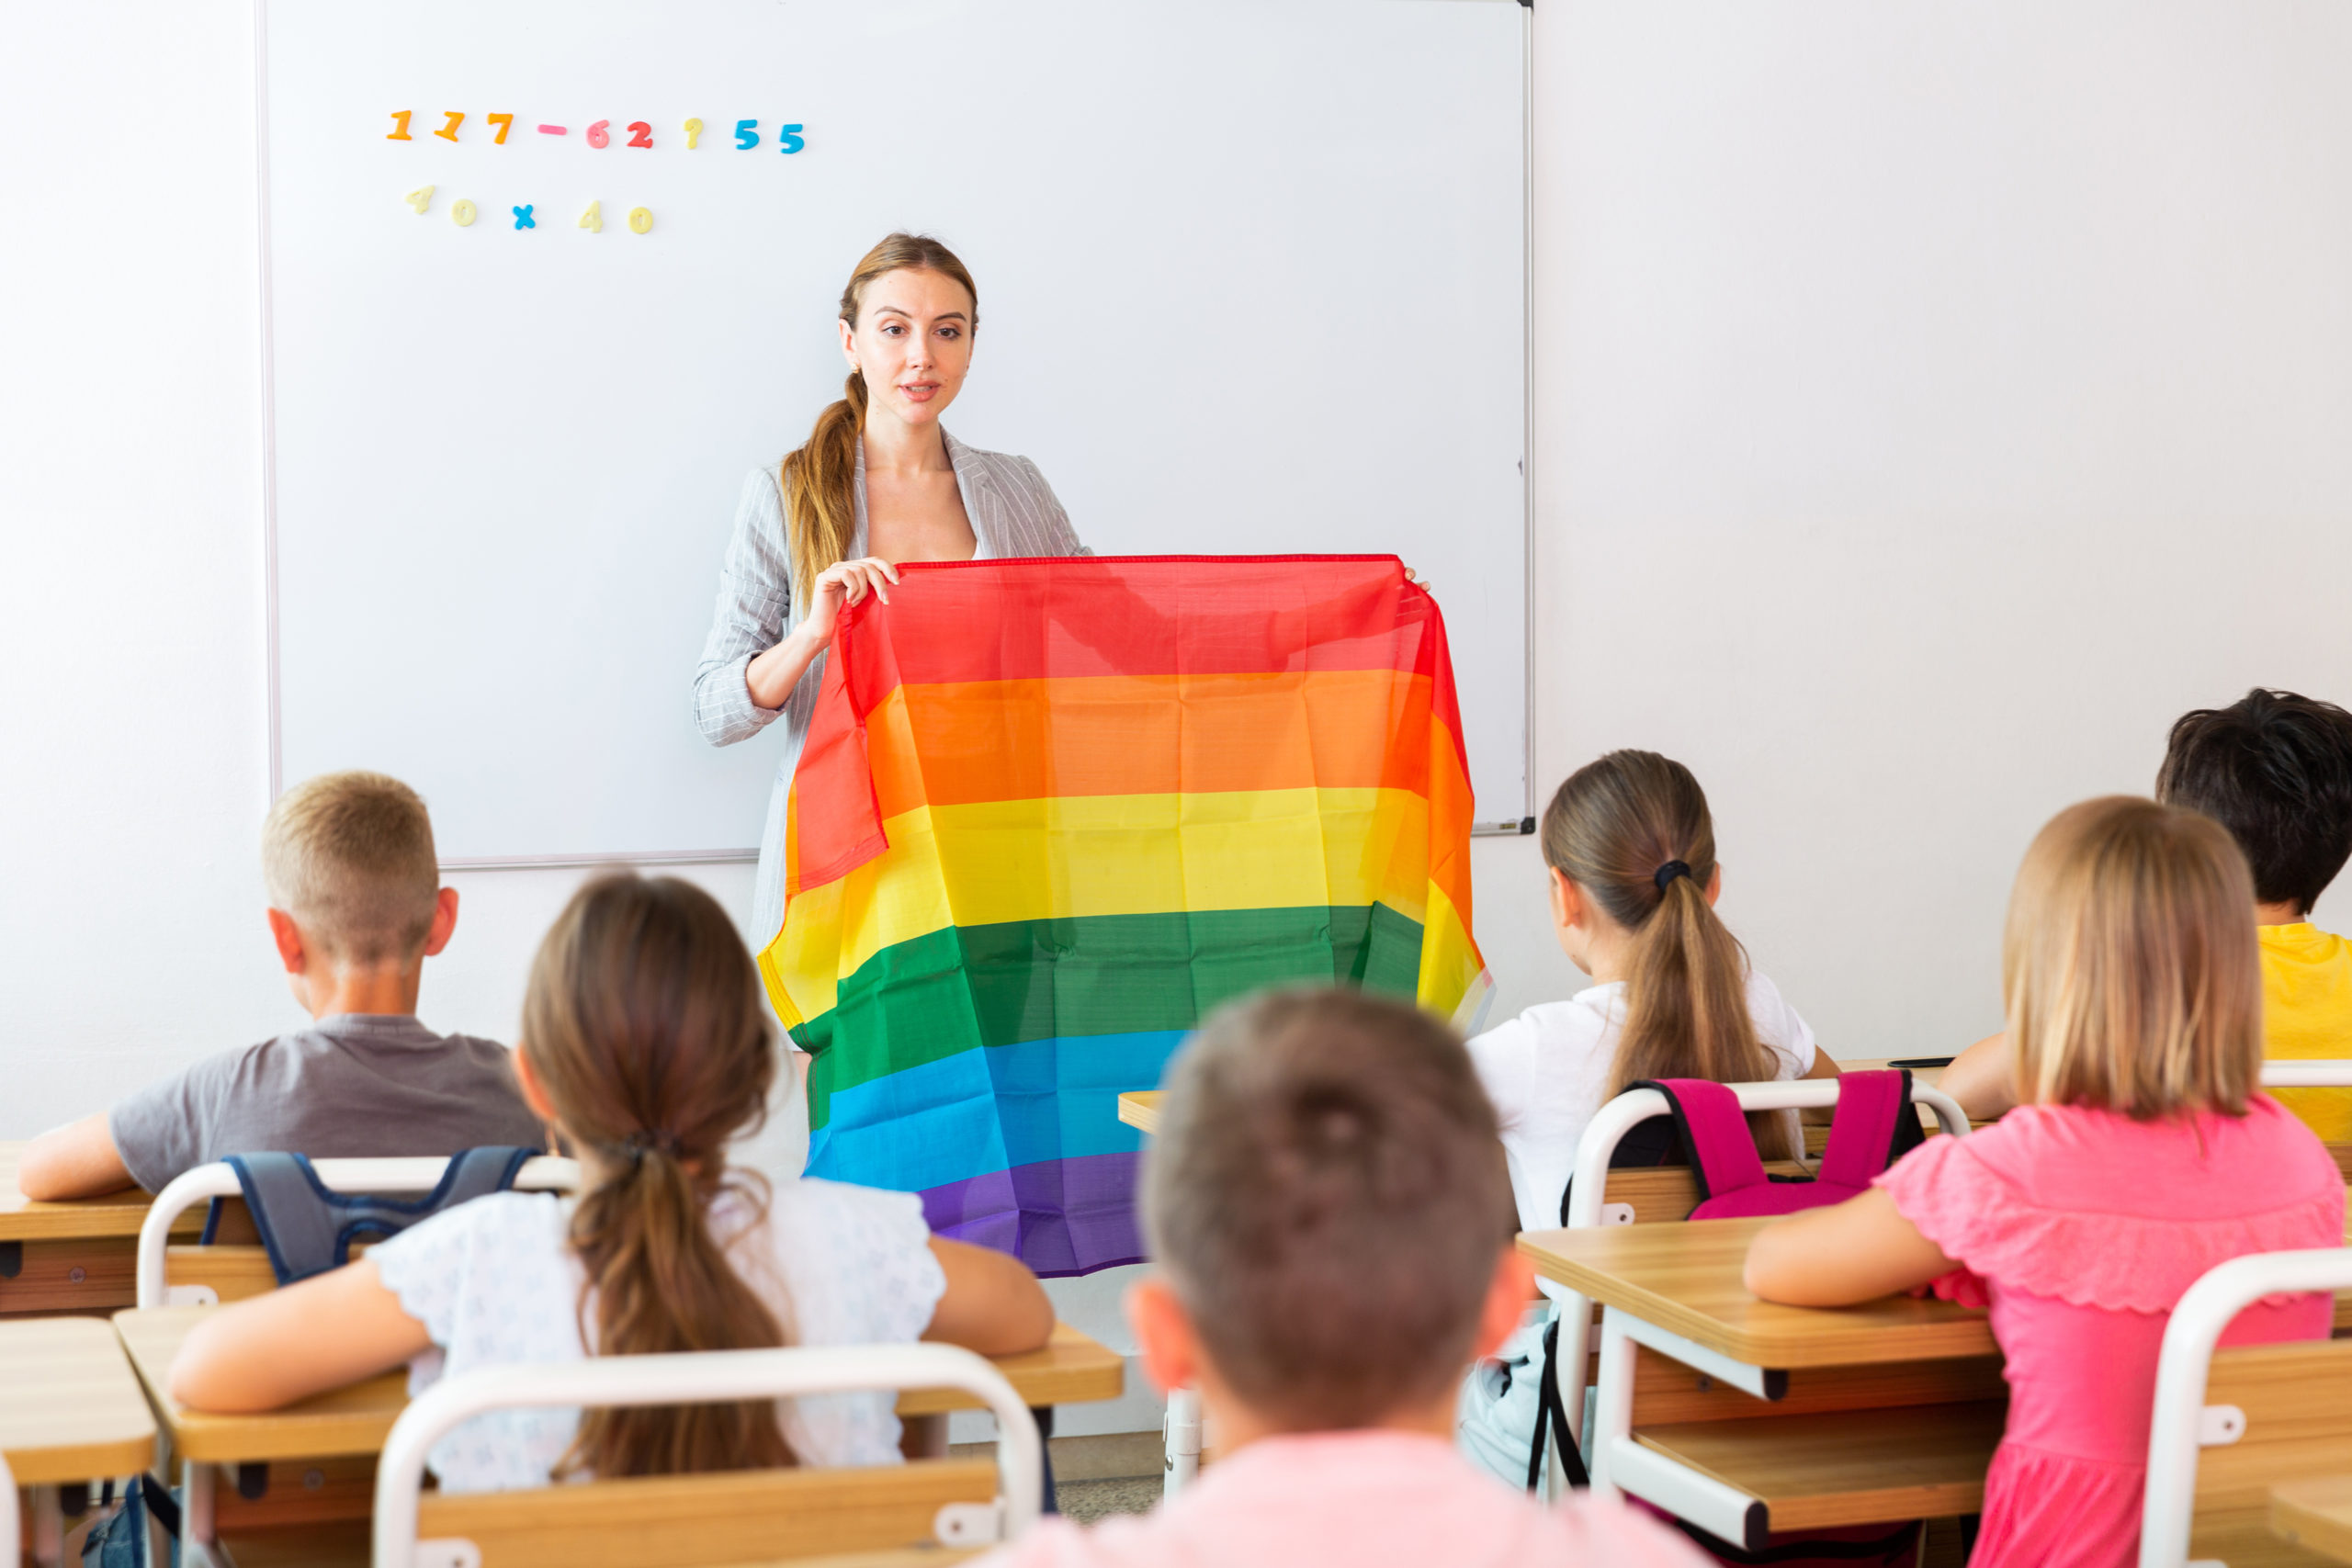 Back to School and “Gender Identity” Indoctrination